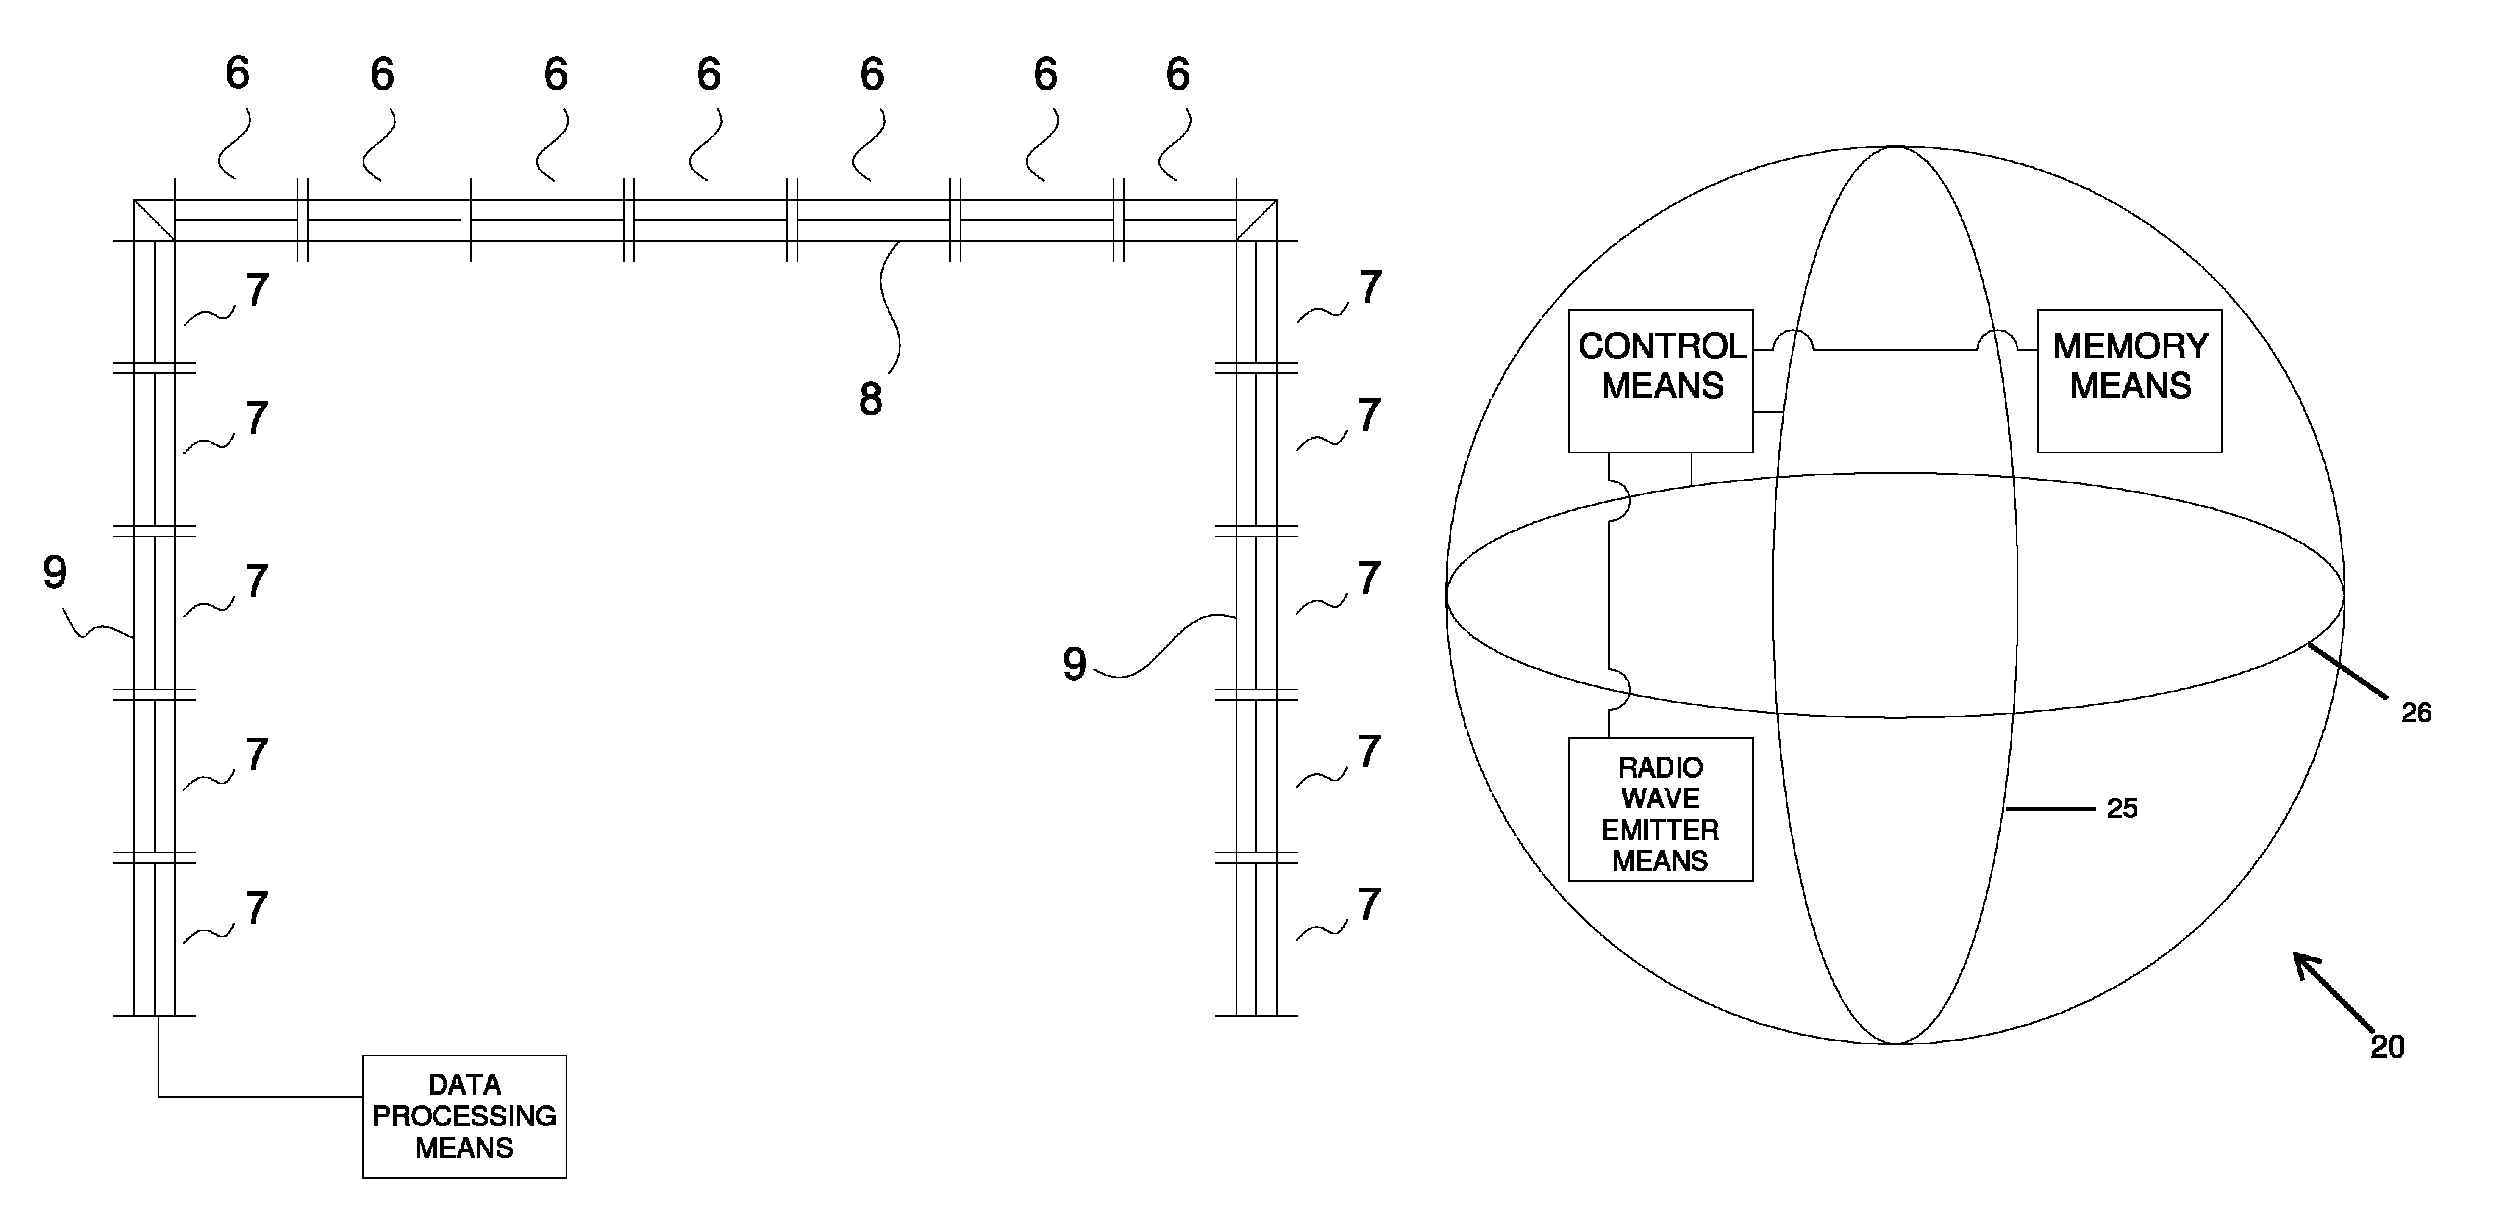 Goal detector for detection of an object passing a goal plane